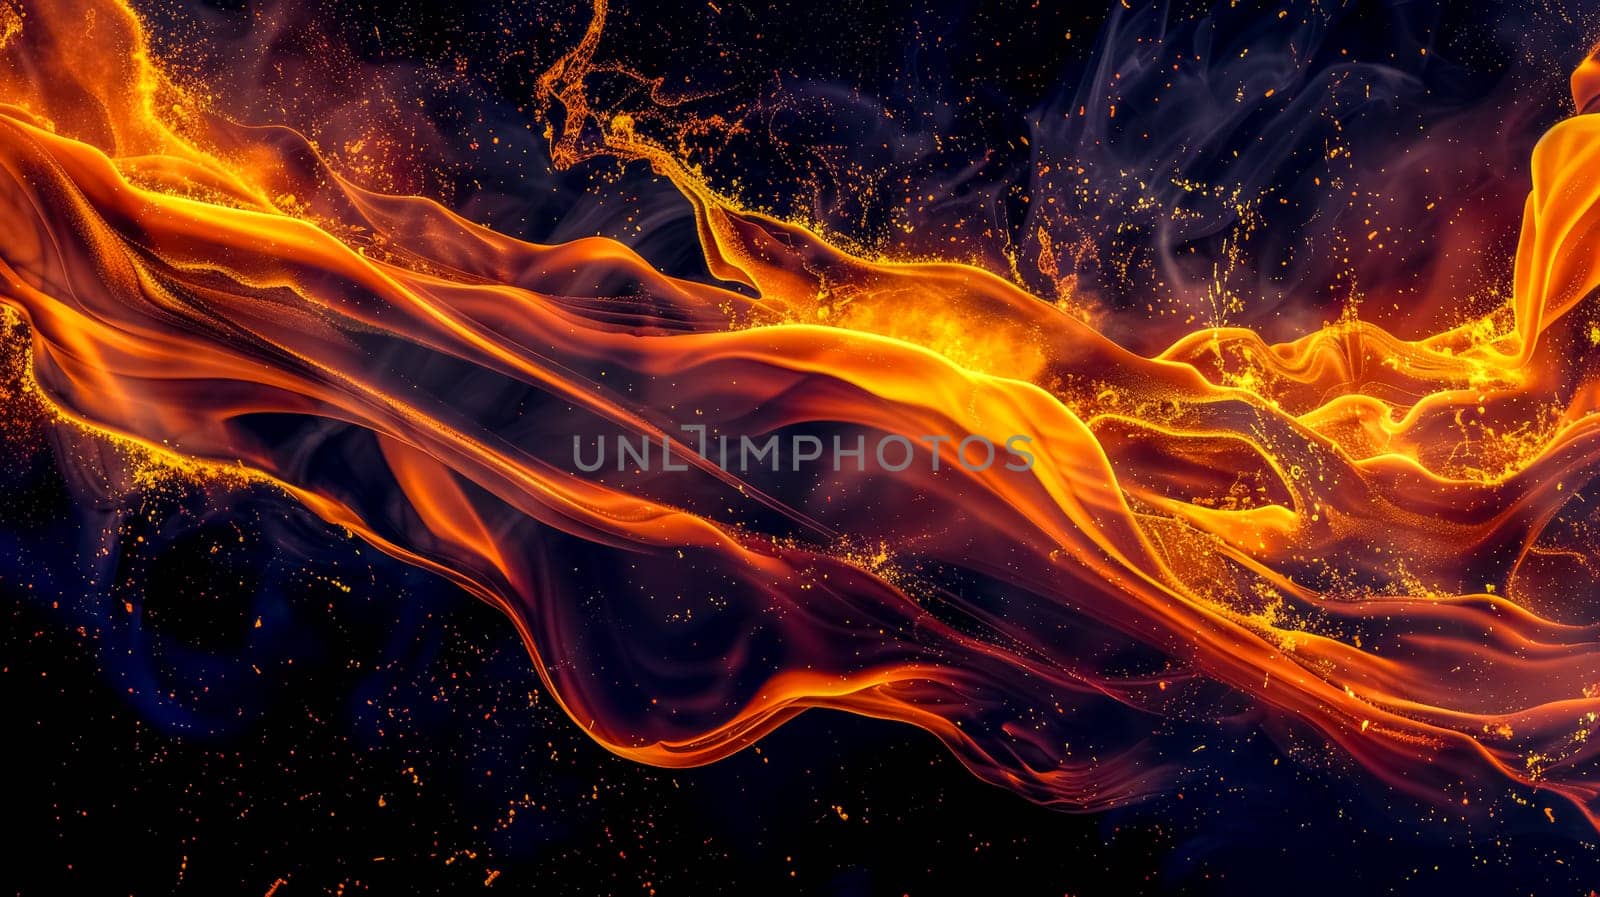 Fiery abstract liquid art background by Edophoto